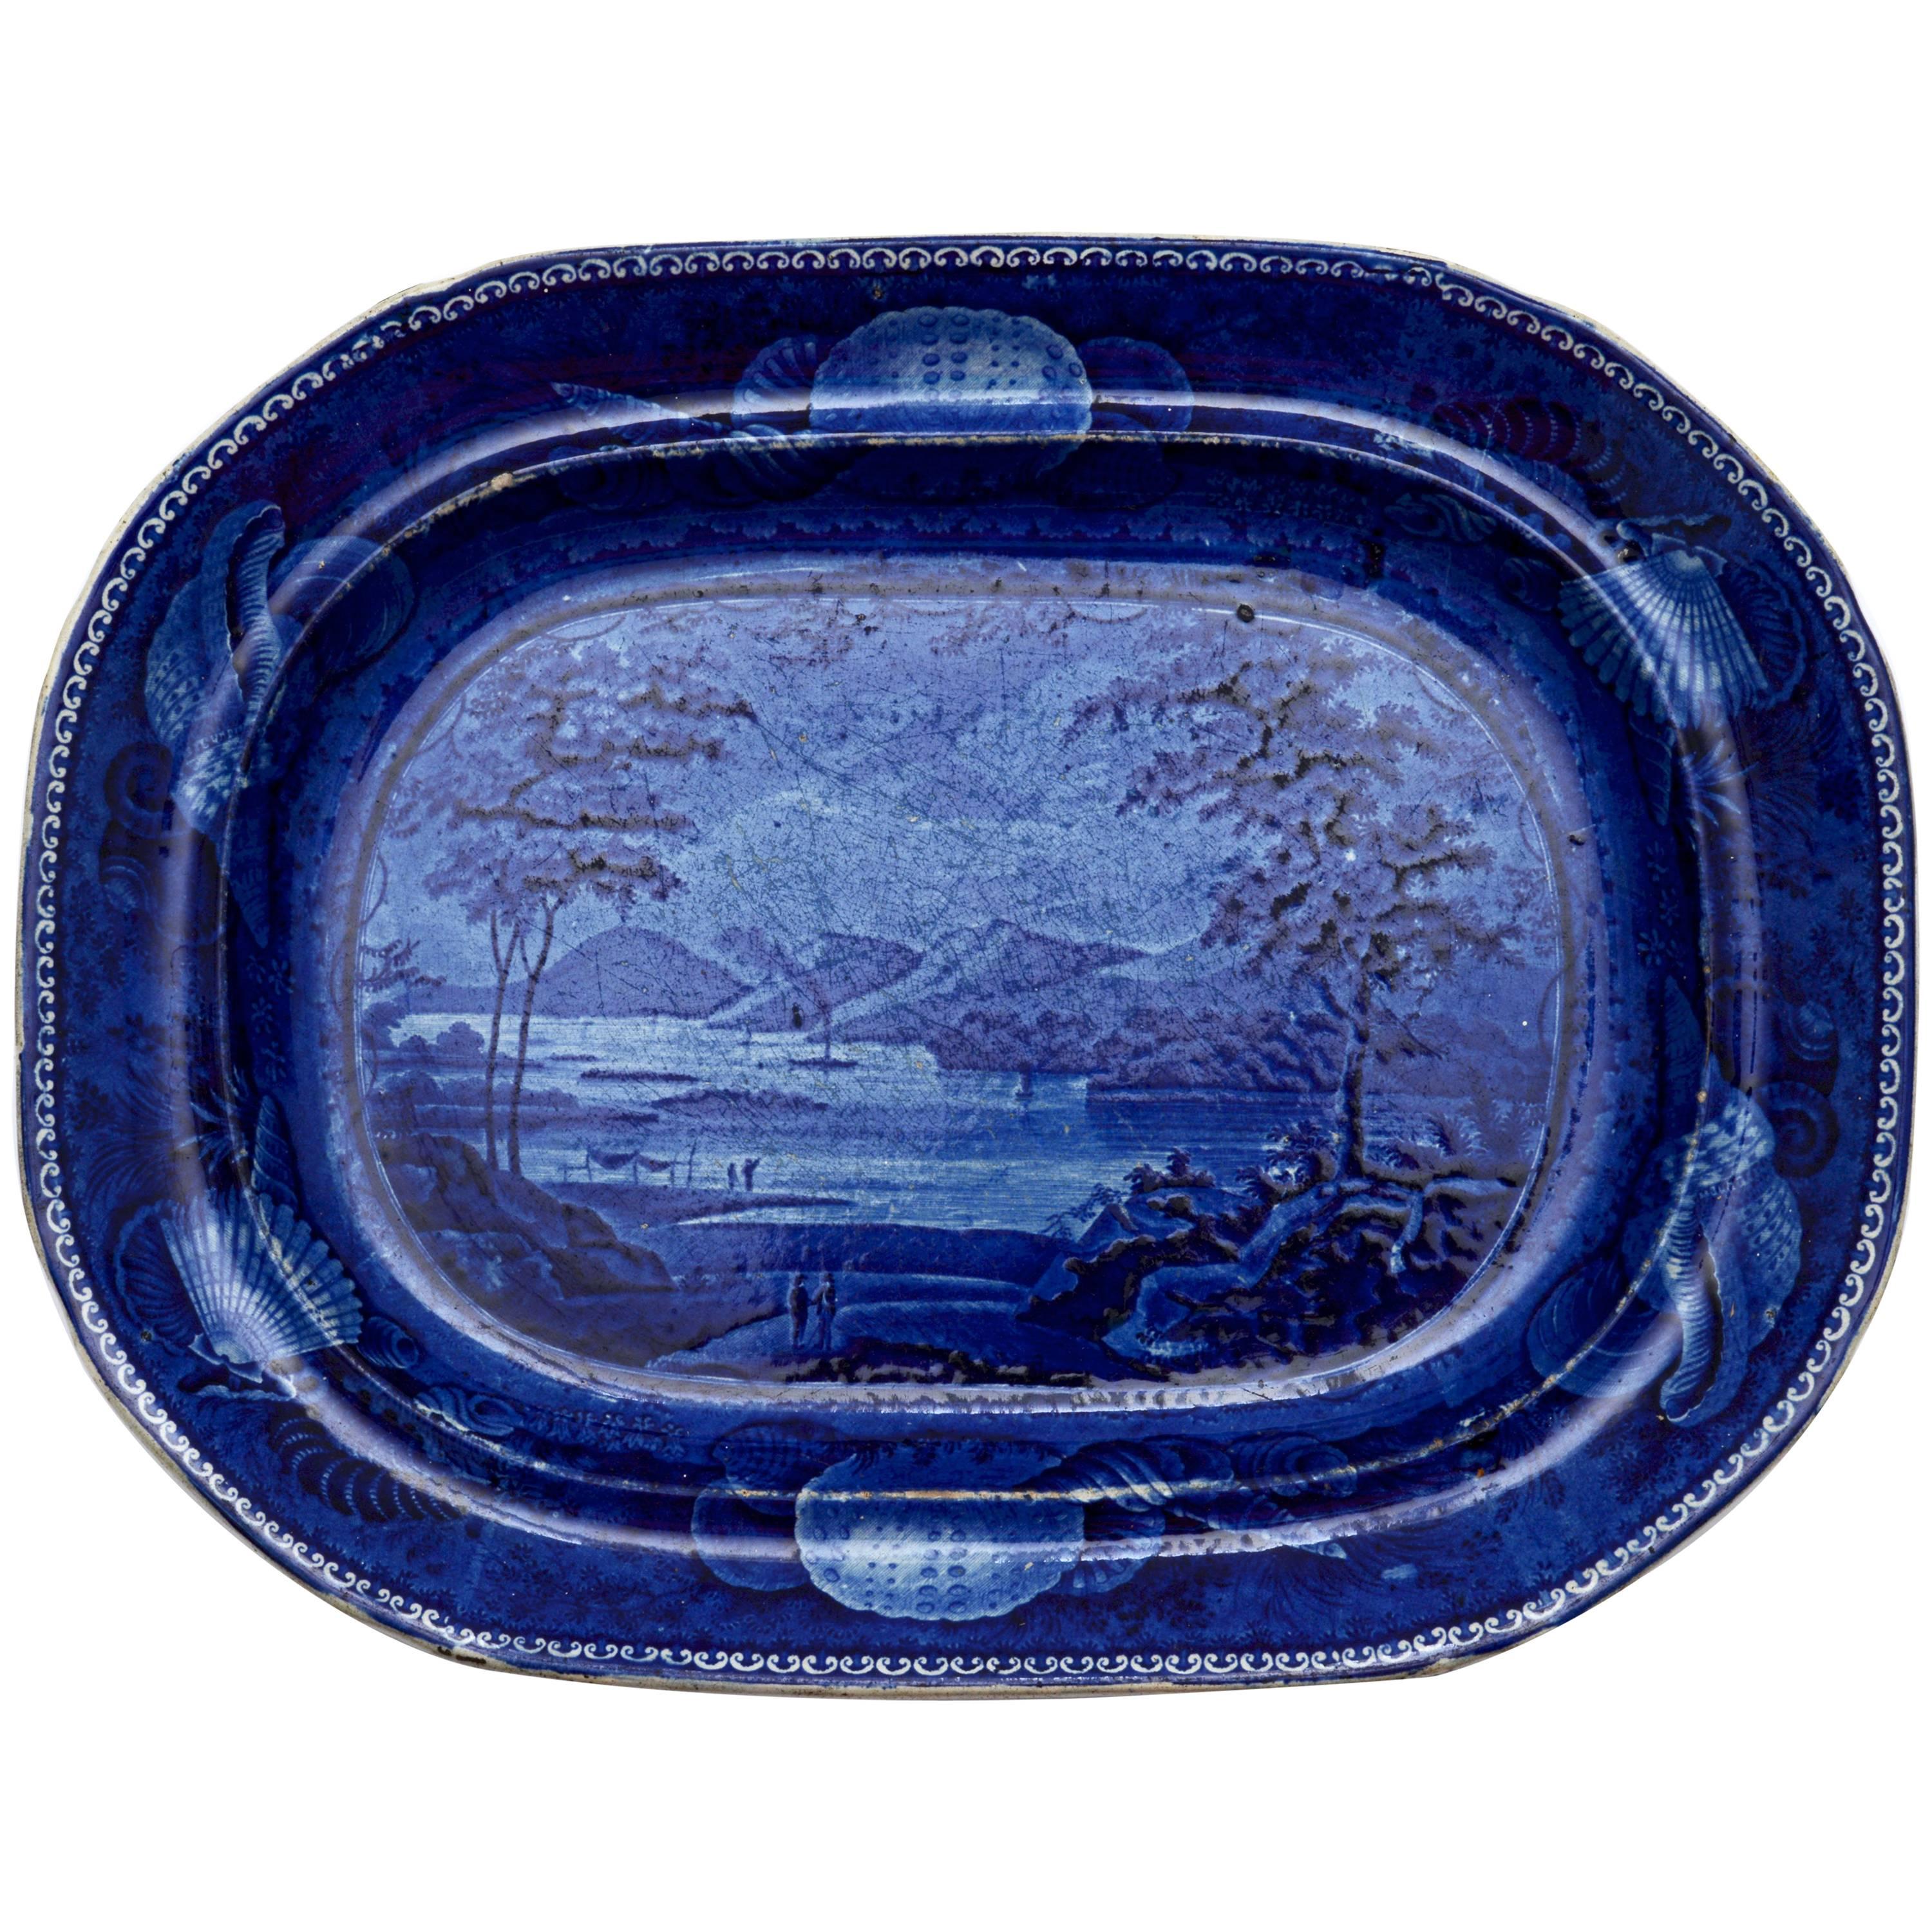 Lake George, State of New York Staffordshire Platter by Enoch Wood & Sons